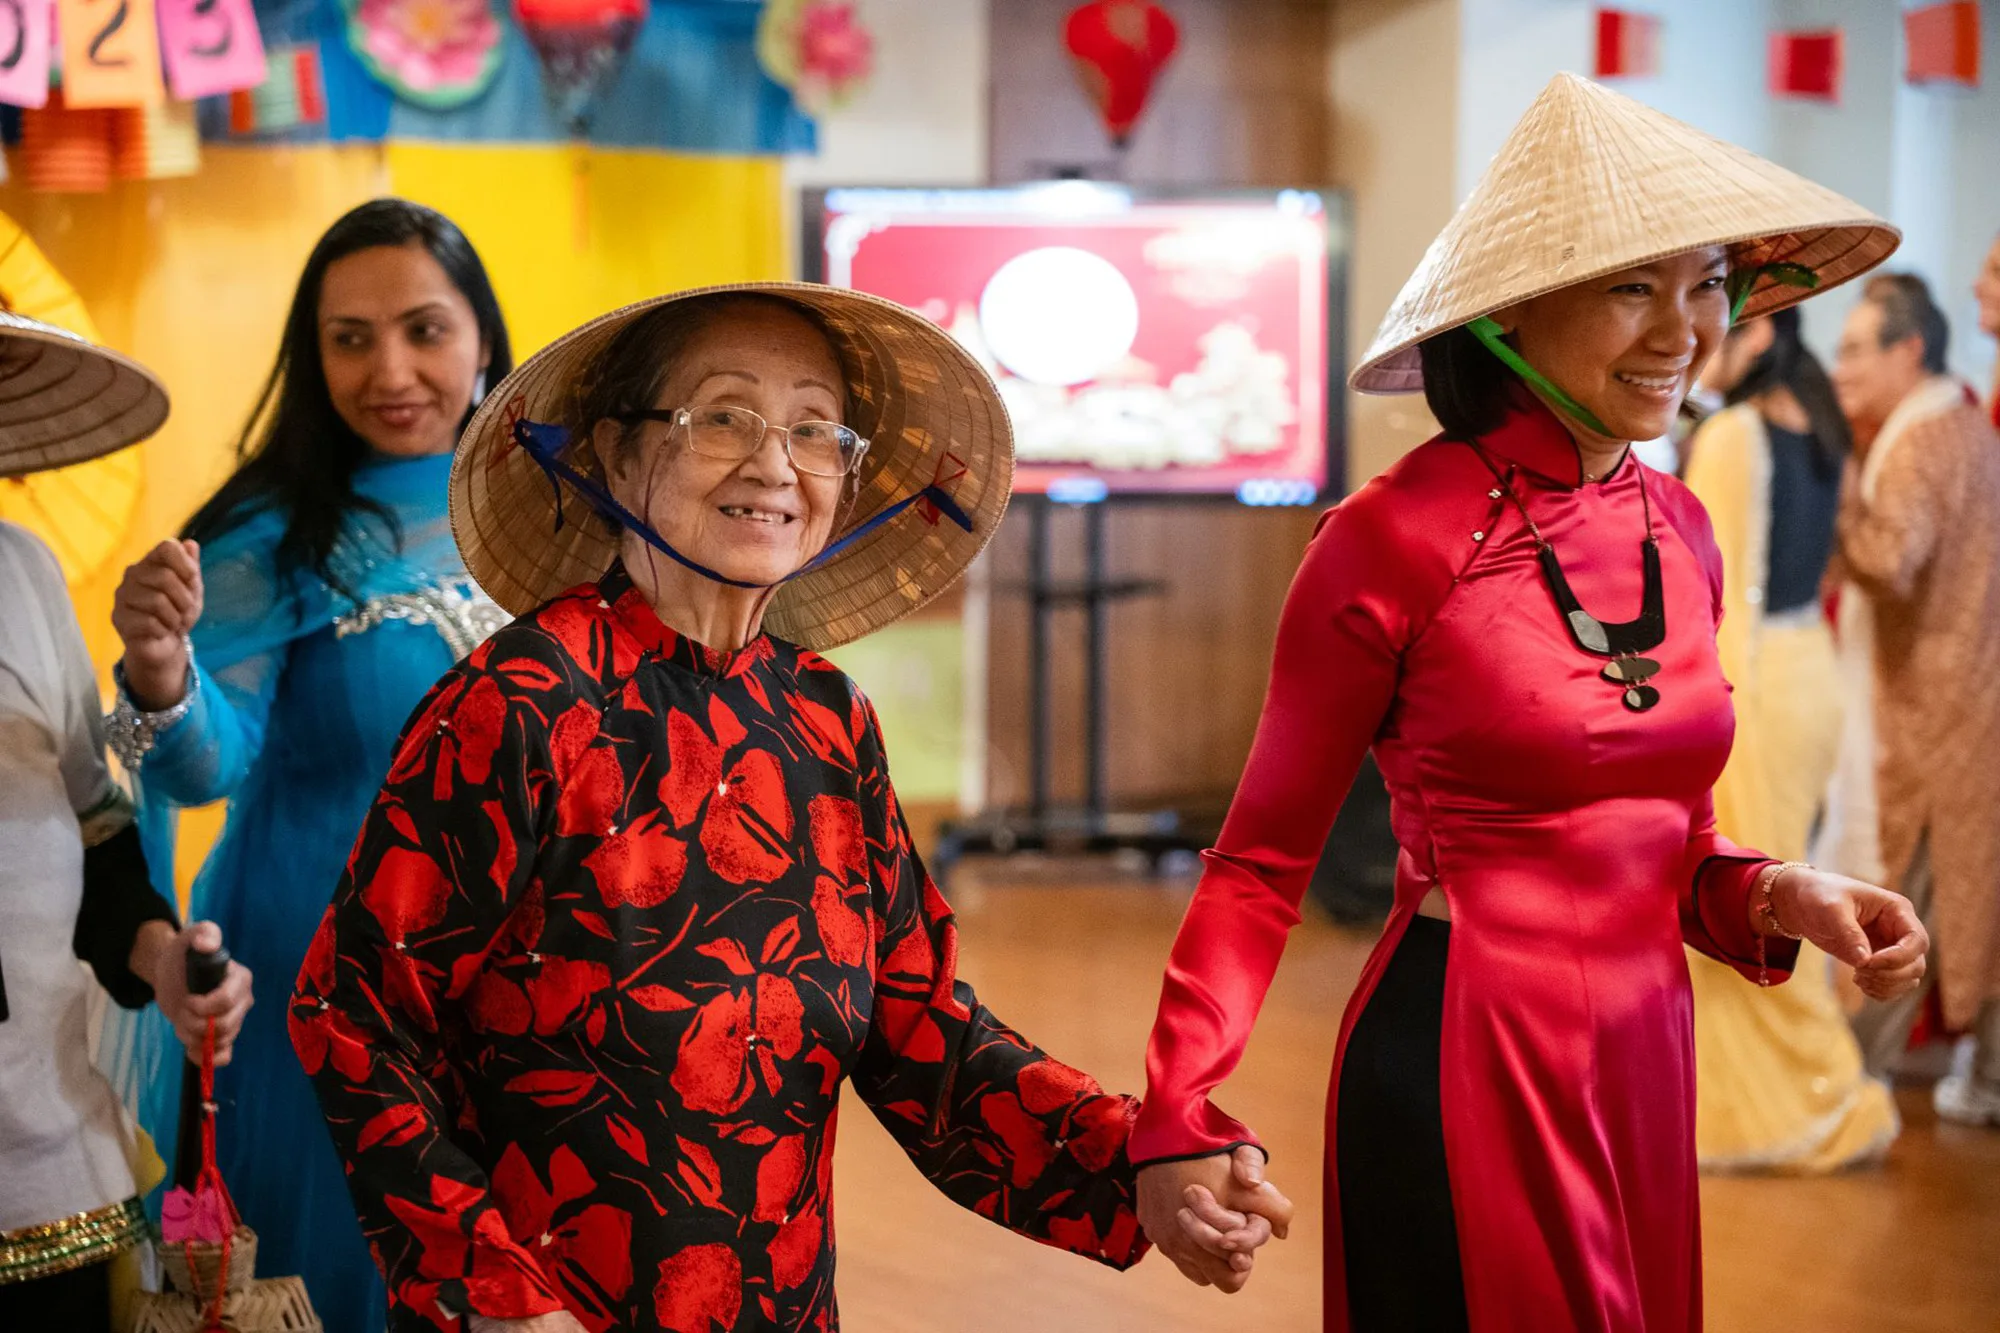 Two women, one an elder and one younger, walk side by side, smiling inside a community center